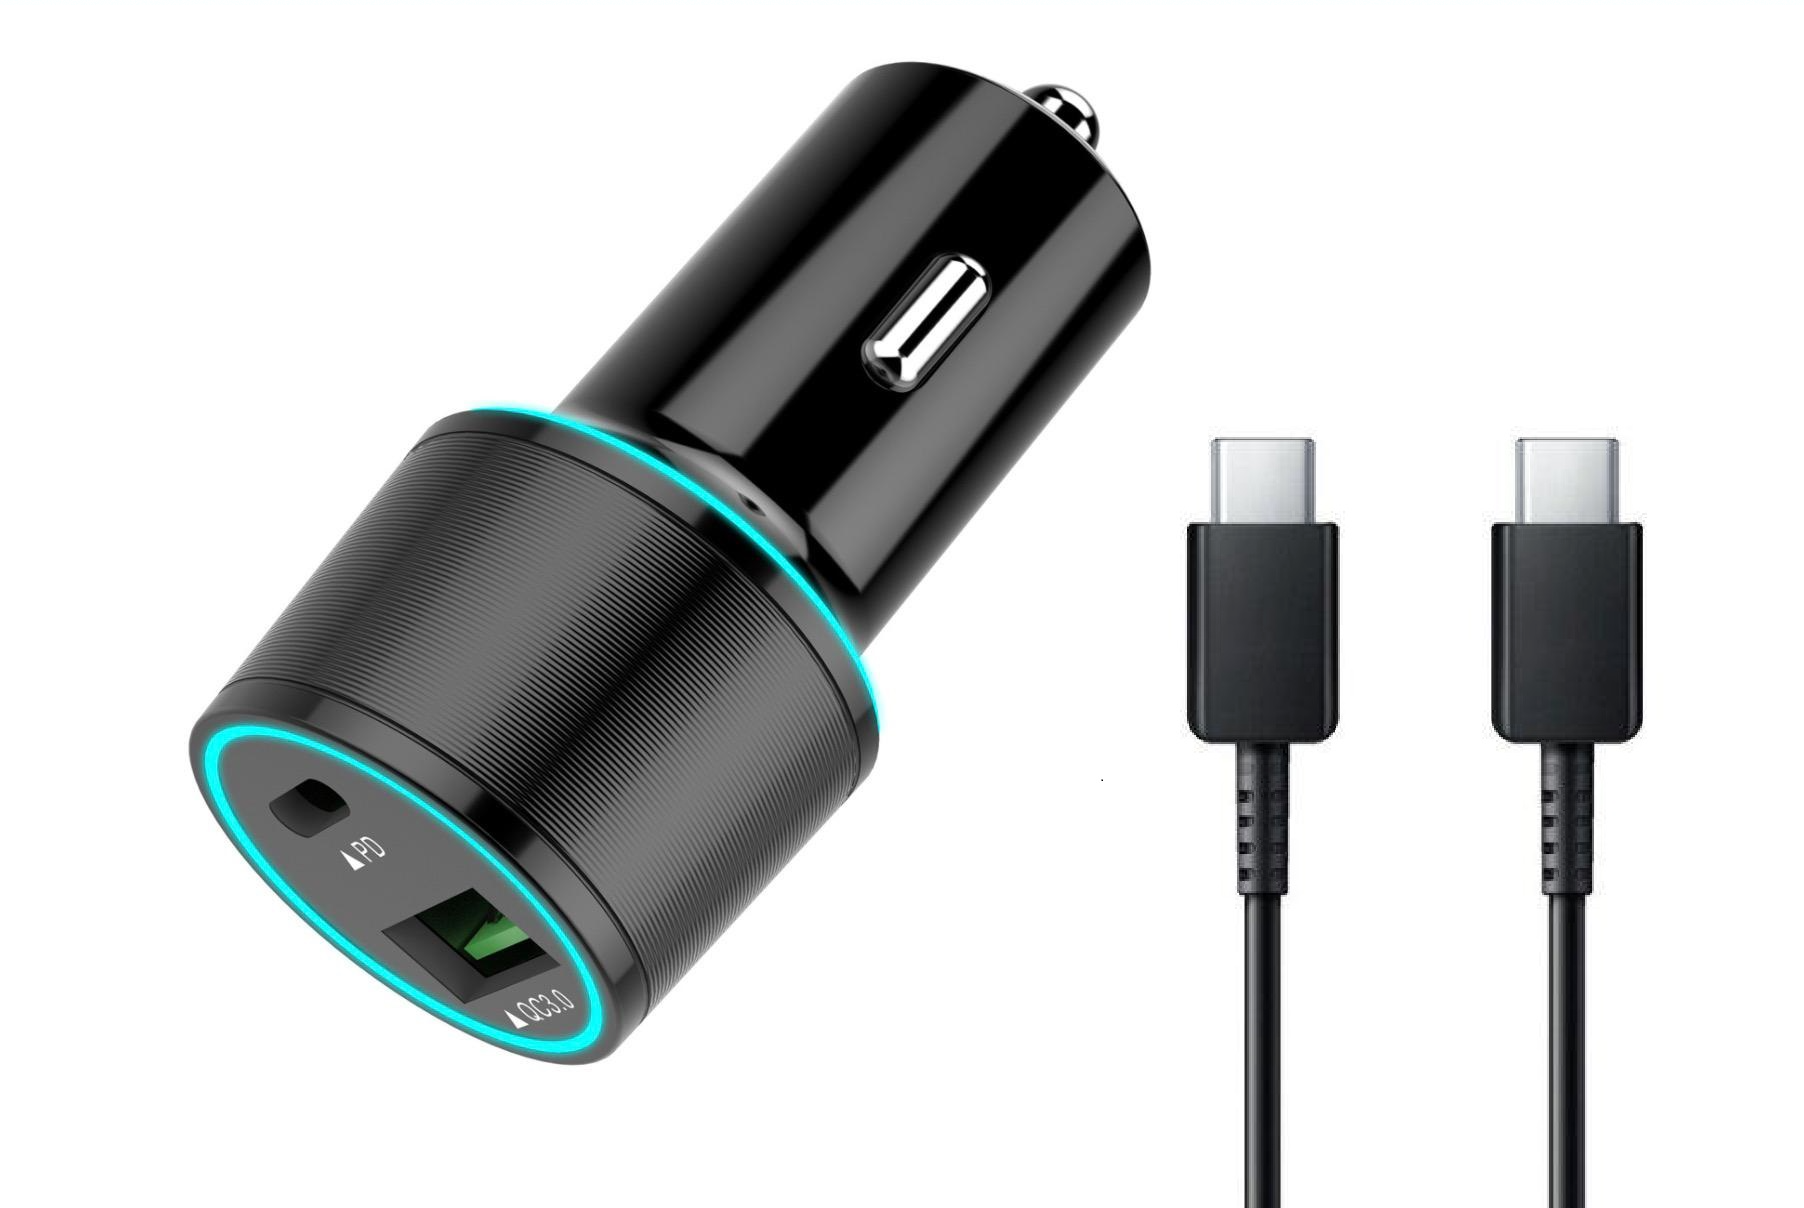 USB C Car Charger UrbanX 20W Car and Truck Charger For Realme X50 5G with Power Delivery 3.0 Cigarette Lighter USB Charger - Black, Comes with USB C to USB C PD Cable 3.3FT 1M - image 1 of 3